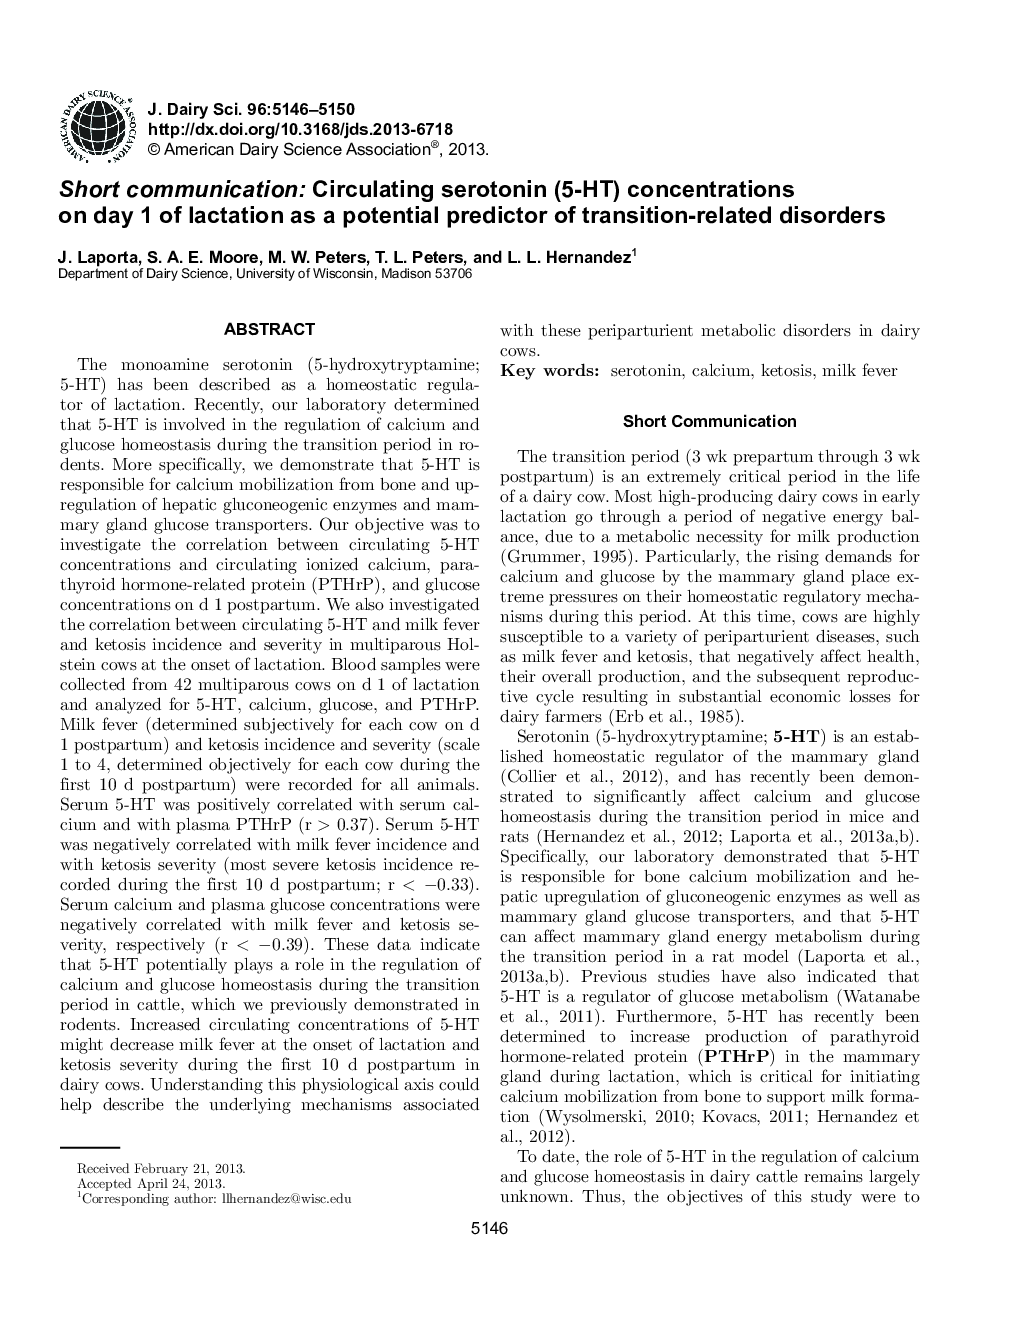 Short communication: Circulating serotonin (5-HT) concentrations on day 1 of lactation as a potential predictor of transition-related disorders